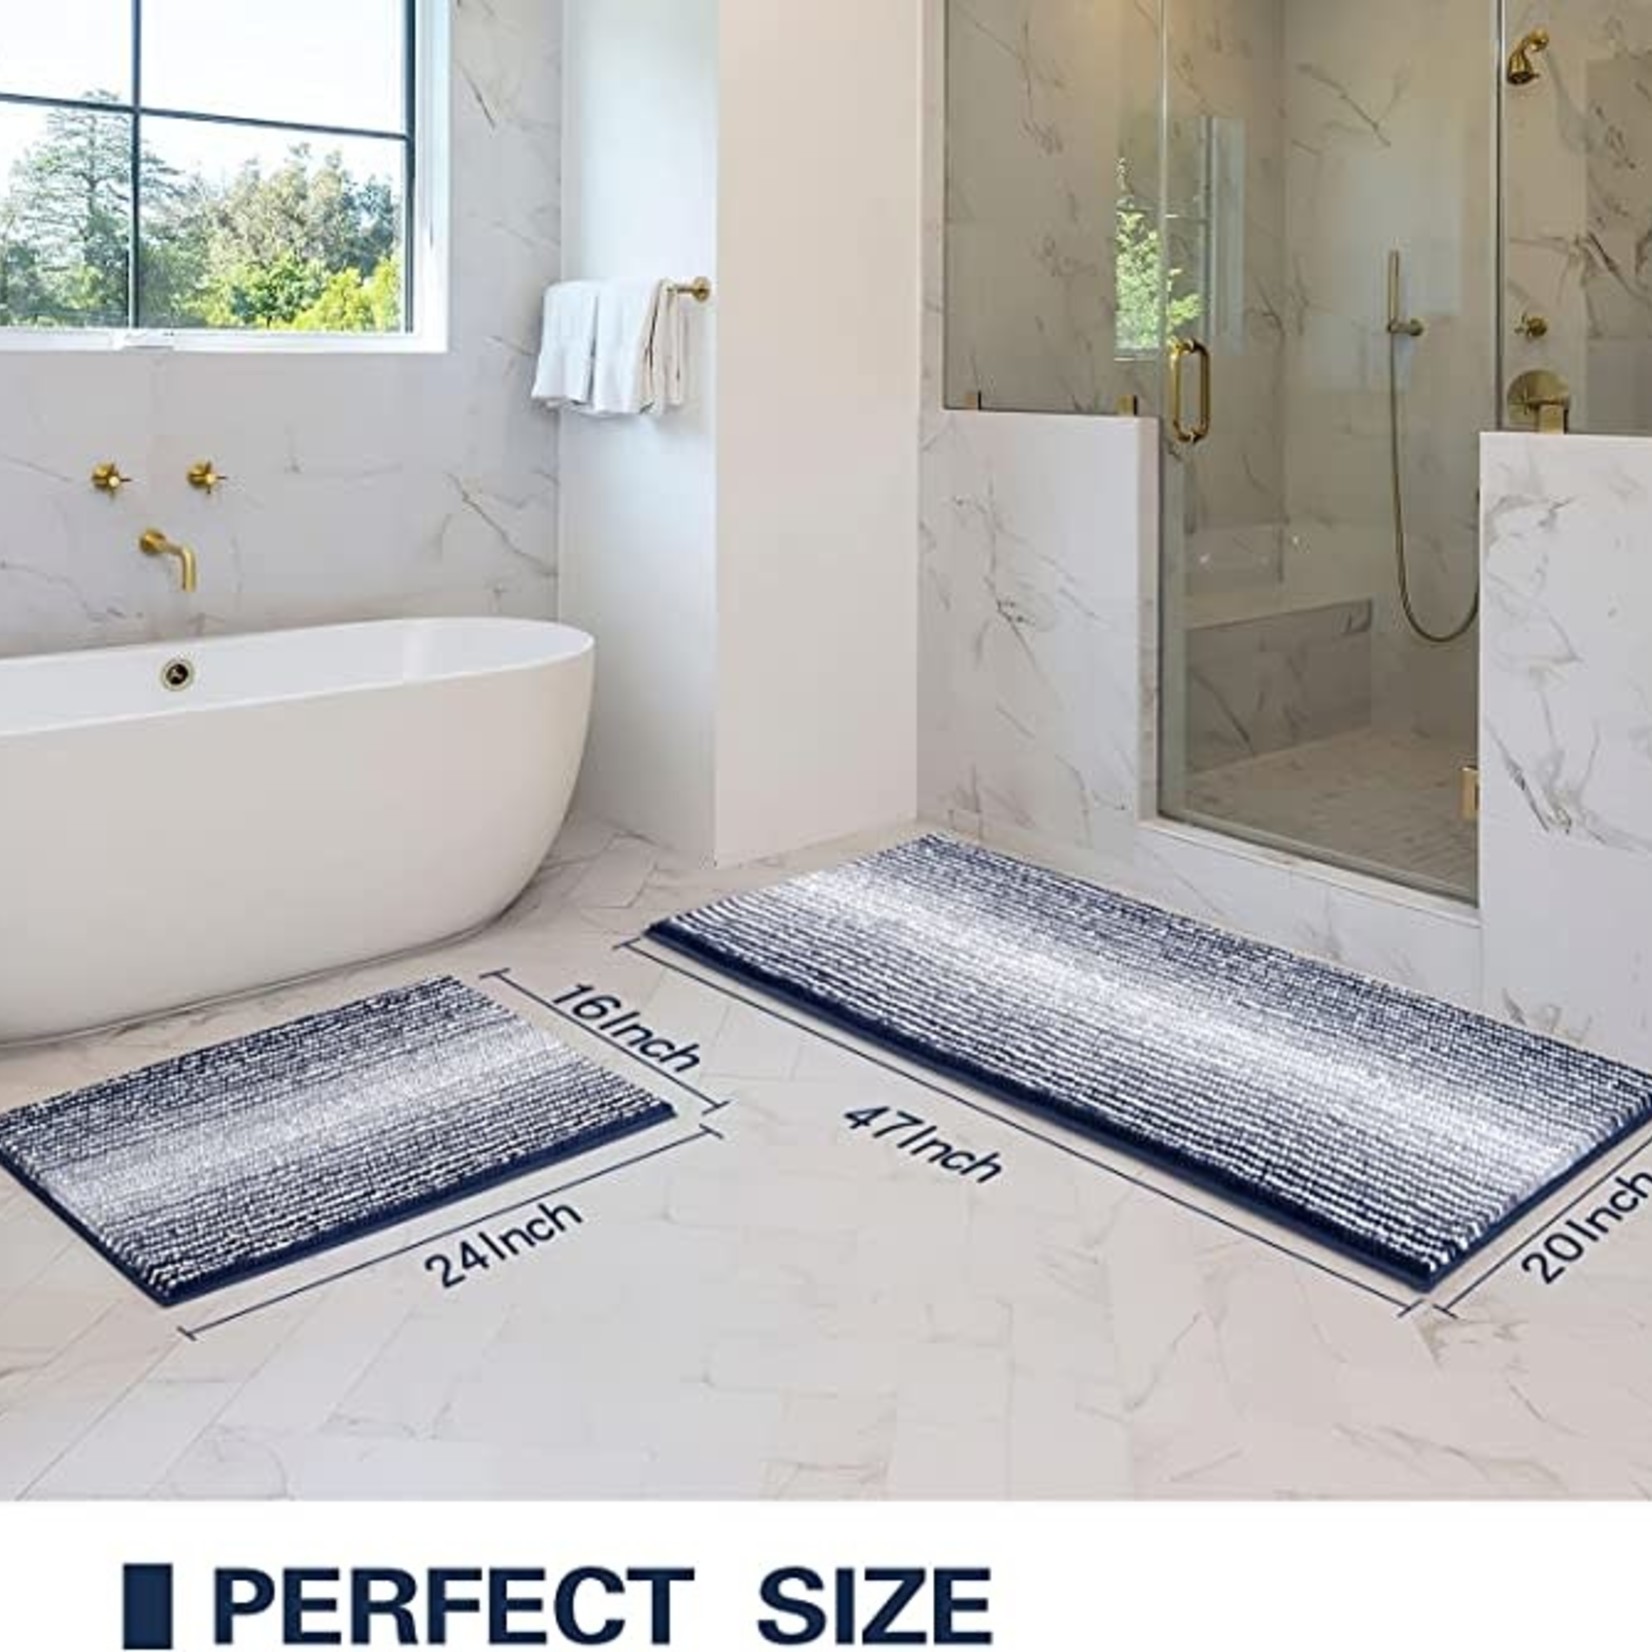 How to Choose the Perfect Bath Rug